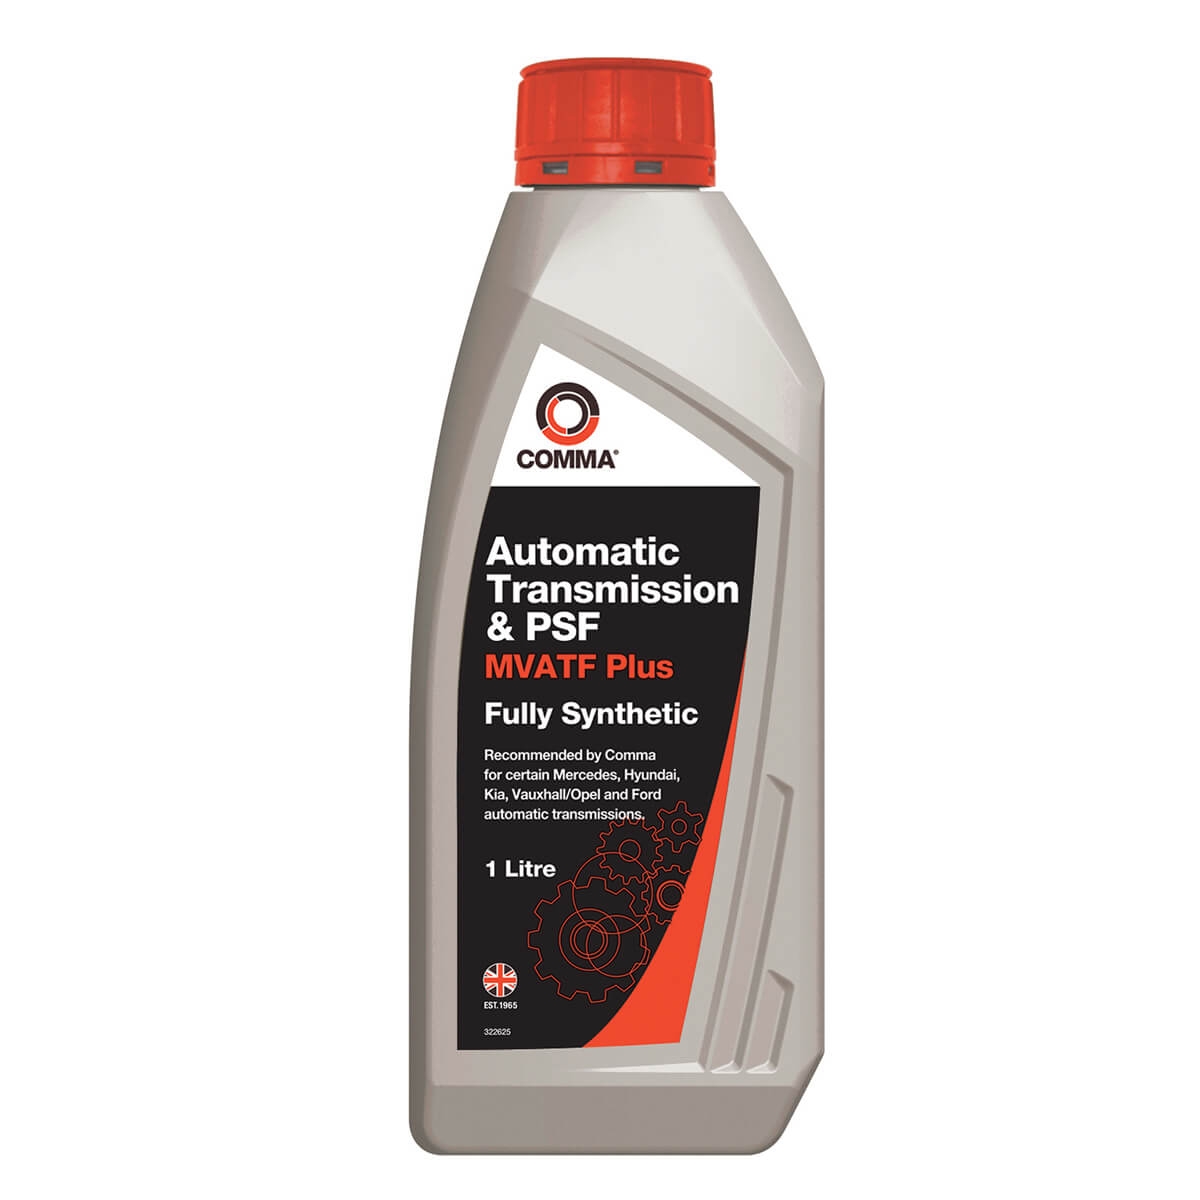 MITSUBISHI SPACE STAR Steering Gear Oil